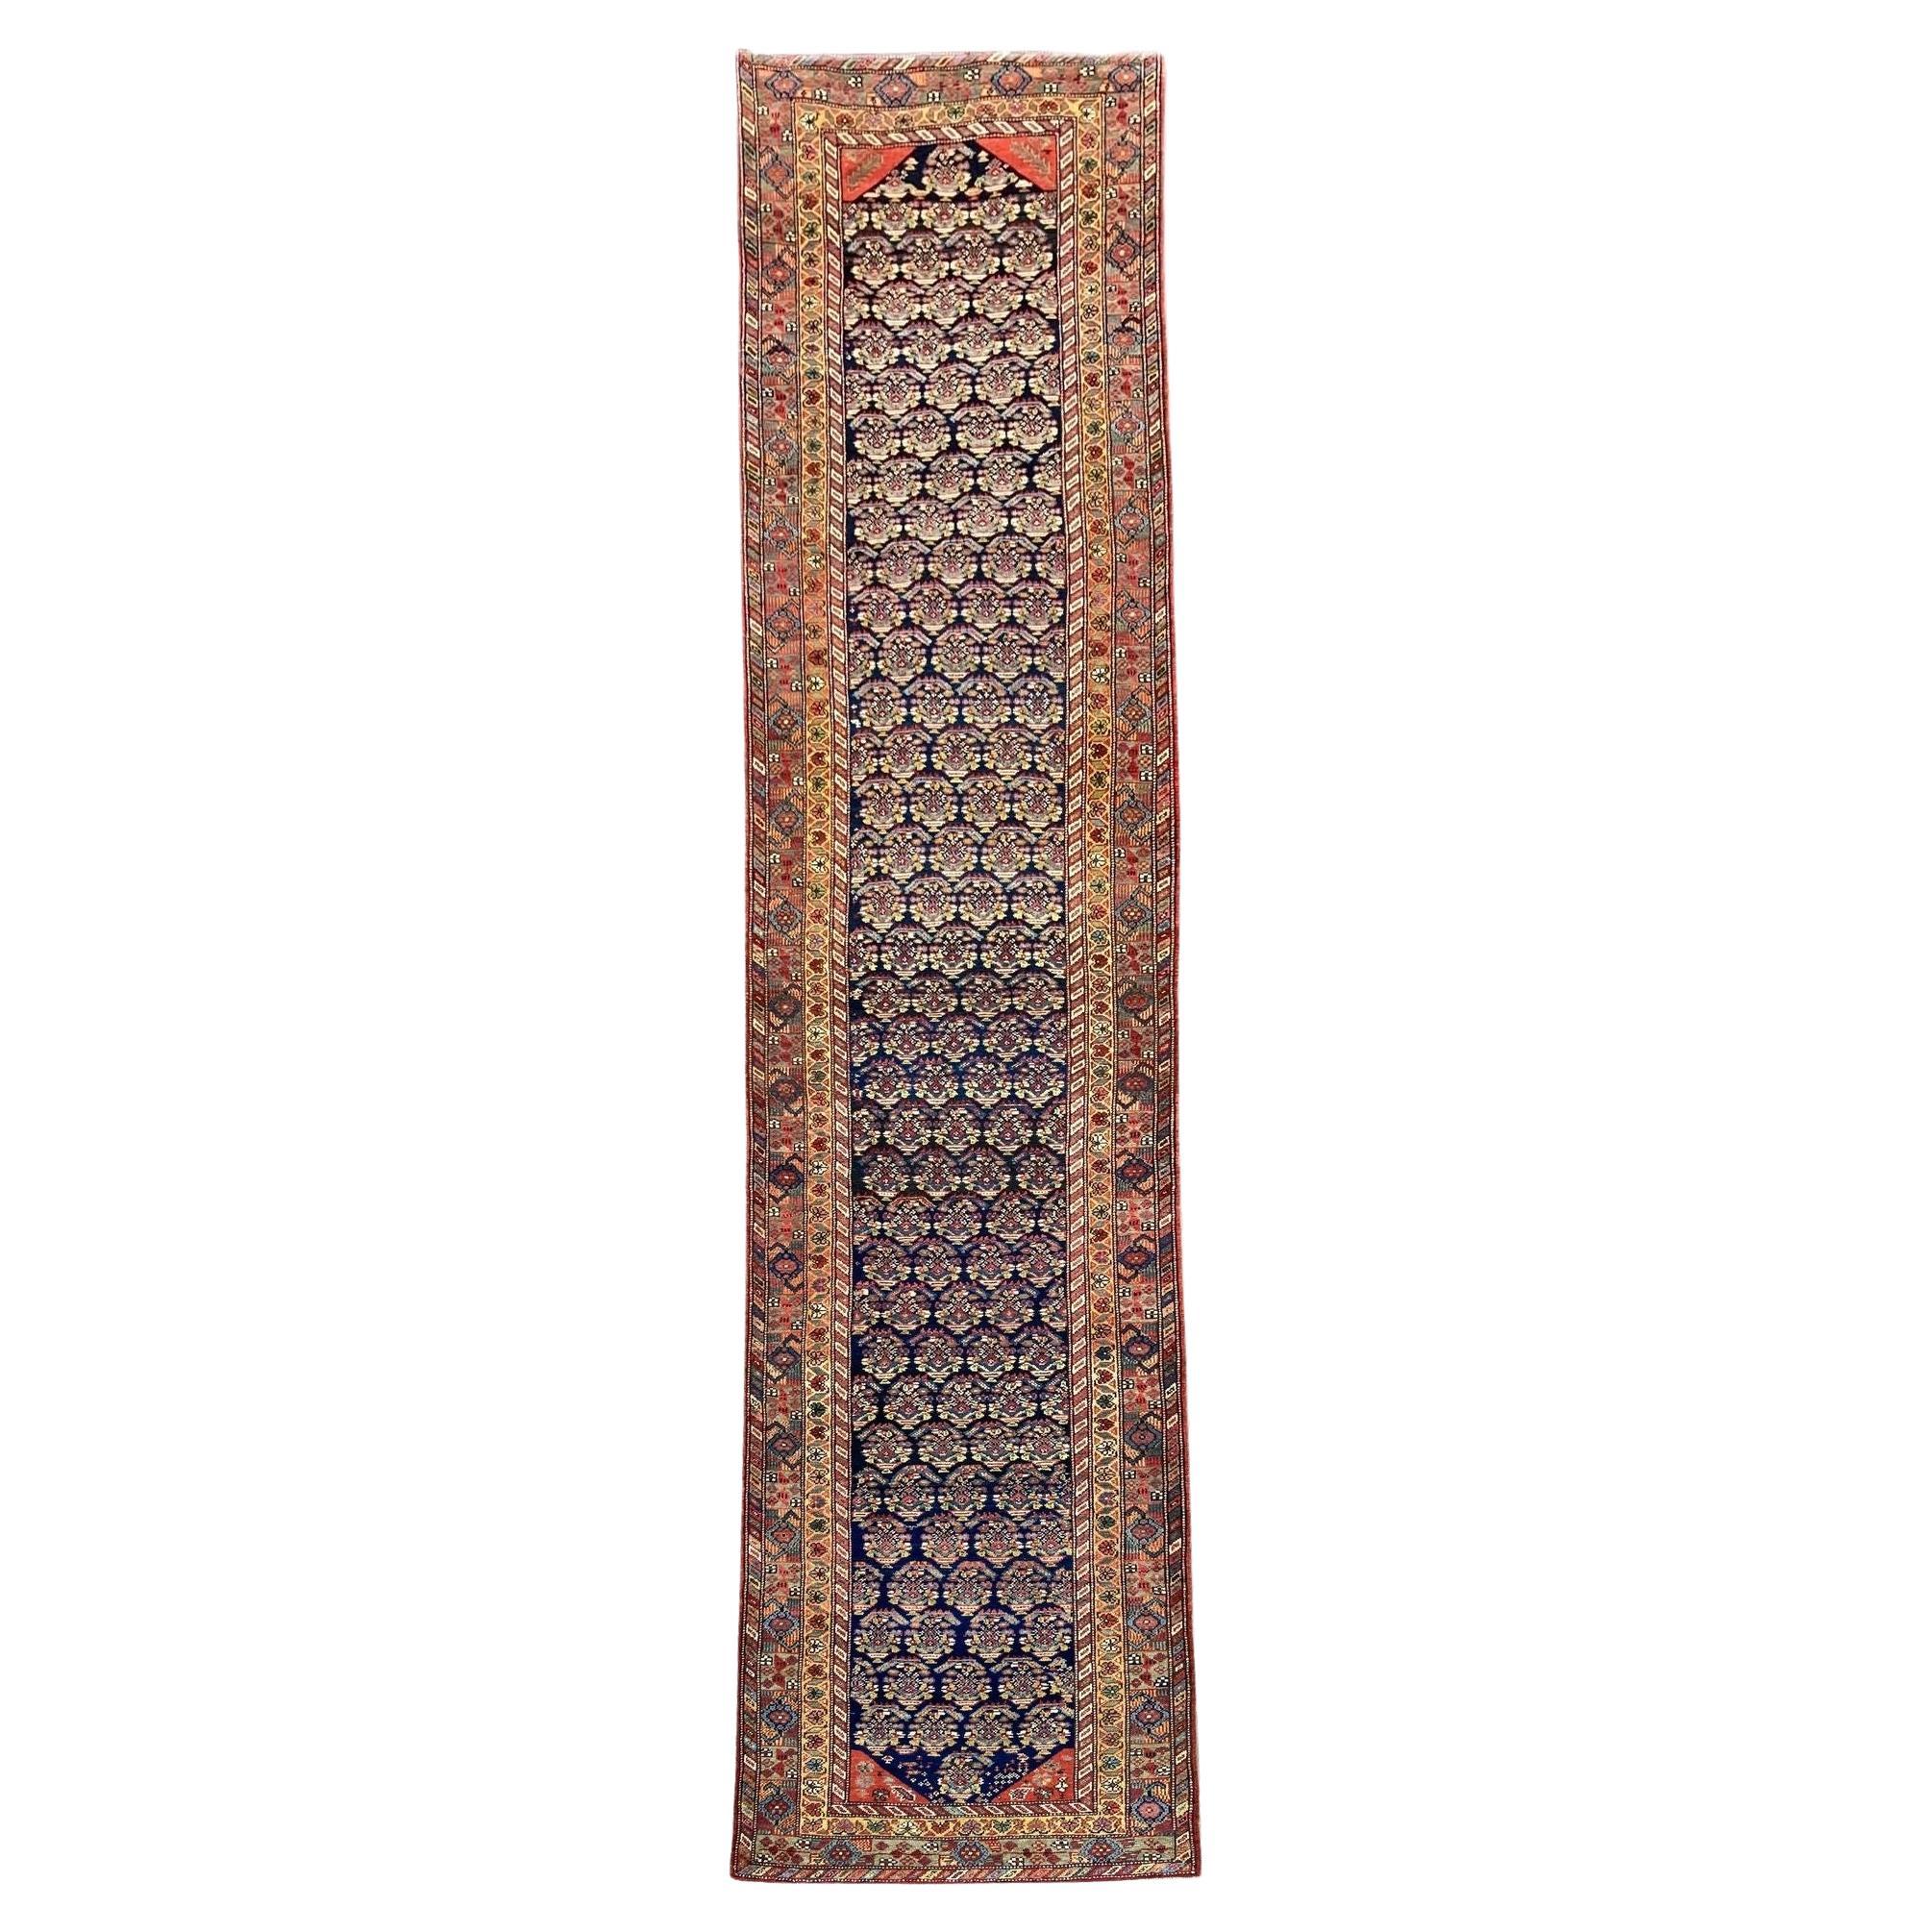 Antique Malayer Runner 4.96m x 1.10m For Sale